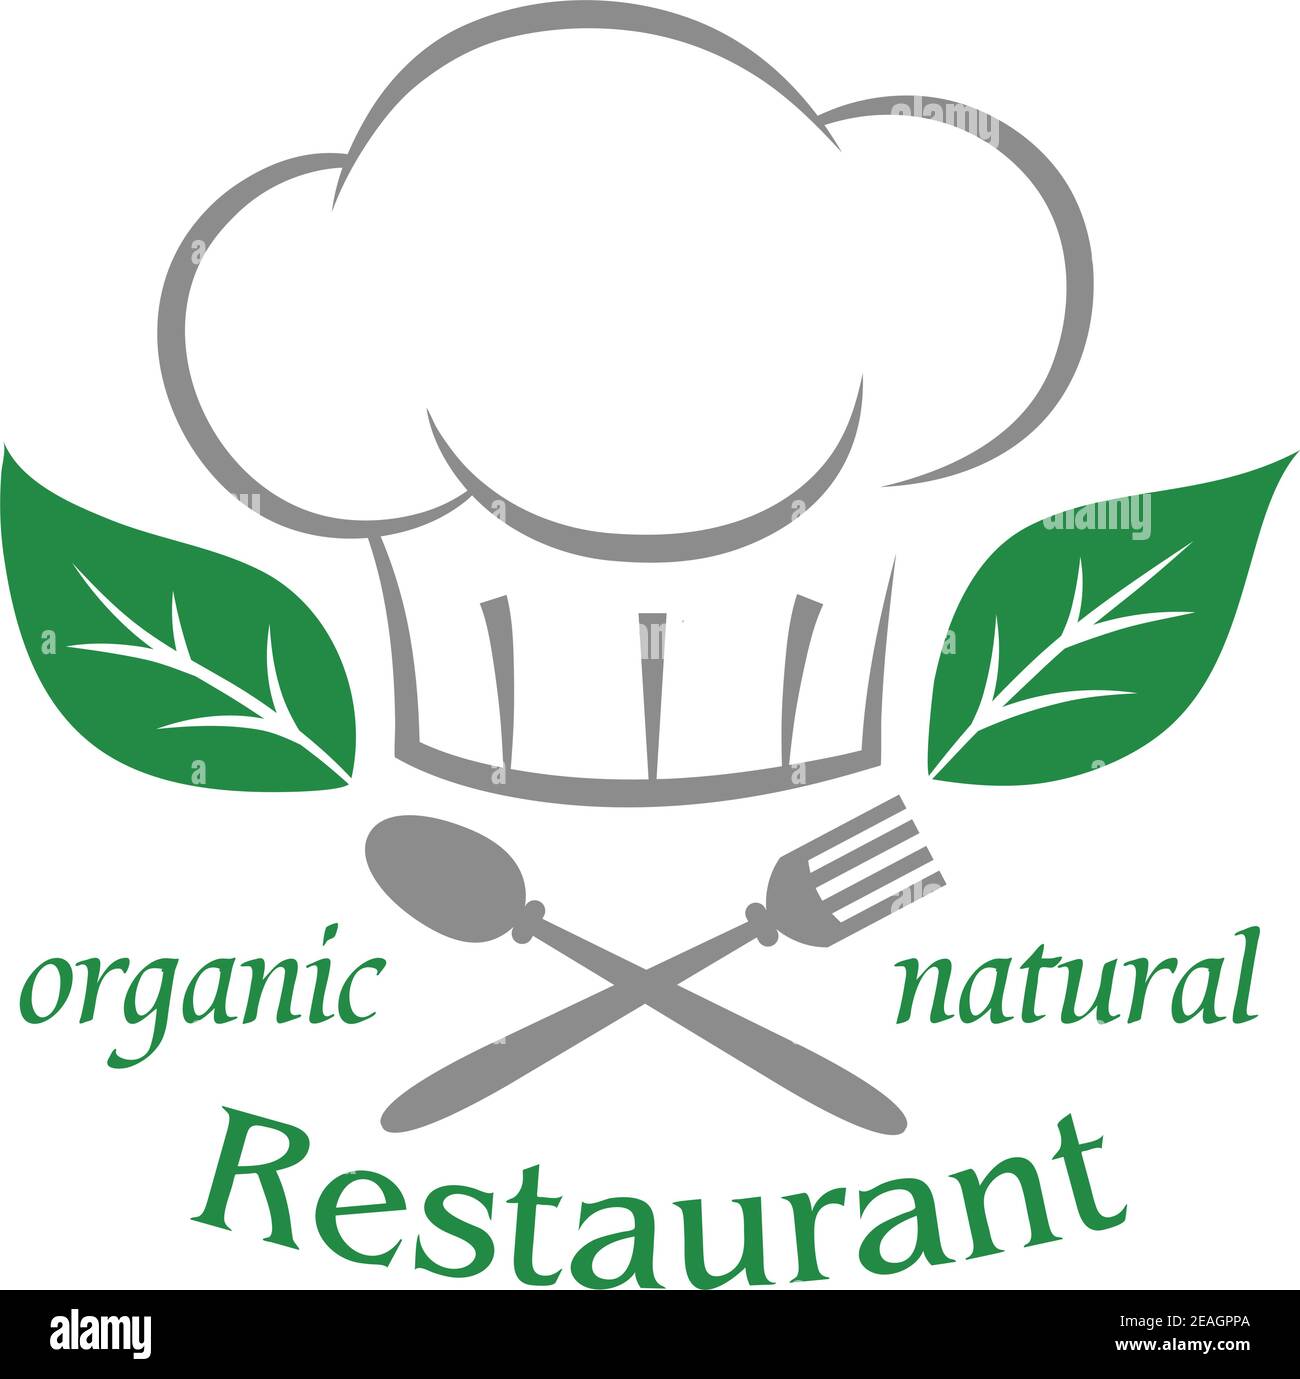 Organic natural restaurant icon with a chefs toque or hat over a crossed spoon and fork with green leaves and text on a white background Stock Vector